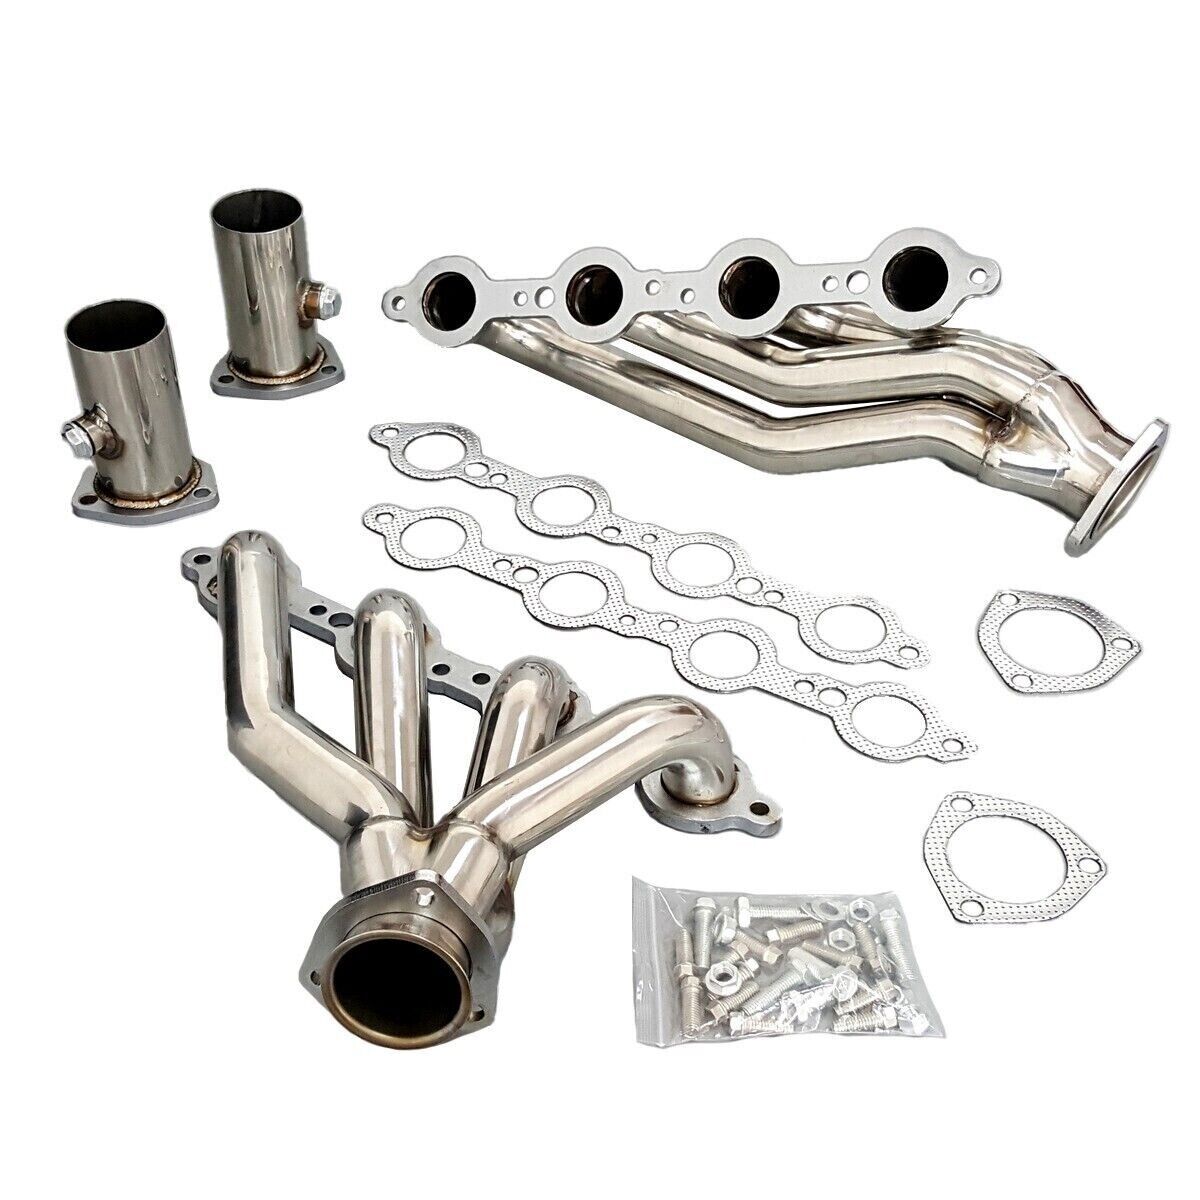 LS Swap S10 Conversion Headers FOR 1982-2004 Chevrolet S10 Truck & GMC Jimmy